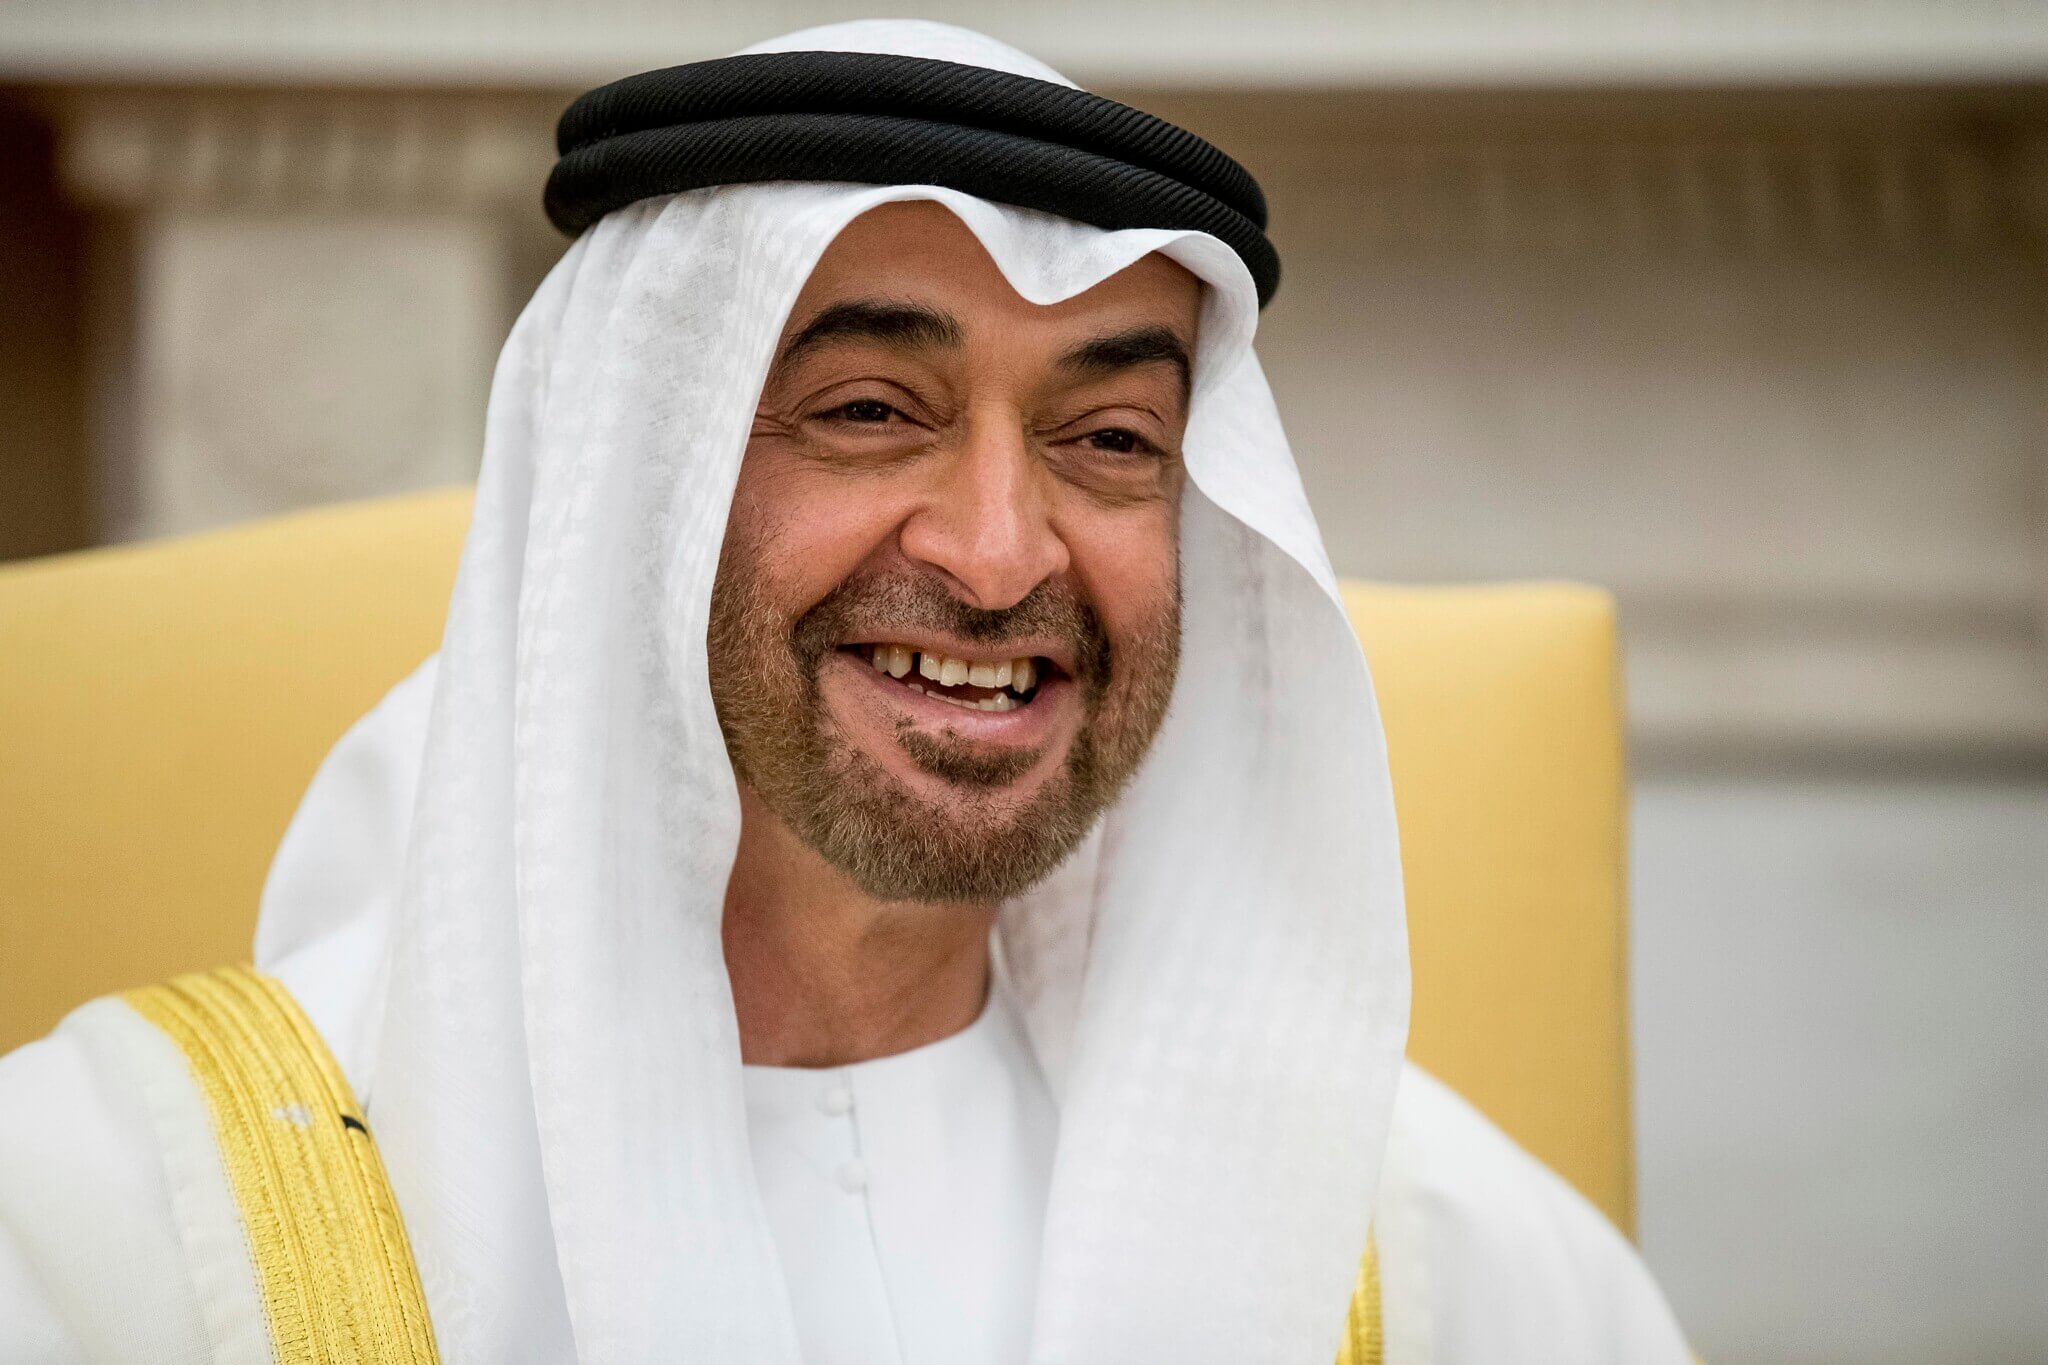 Sheikh Mohamed bin Zayed elected as new president of UAE